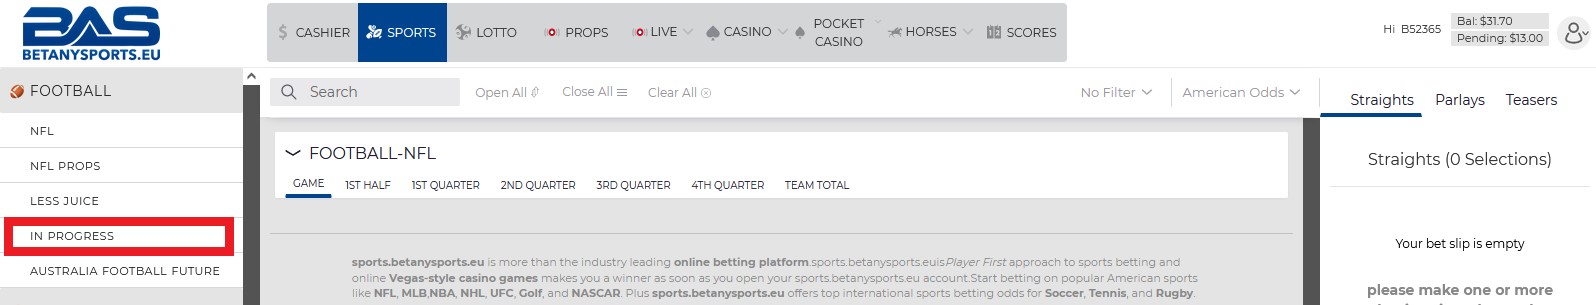 Where to find House Live Wagering Lines